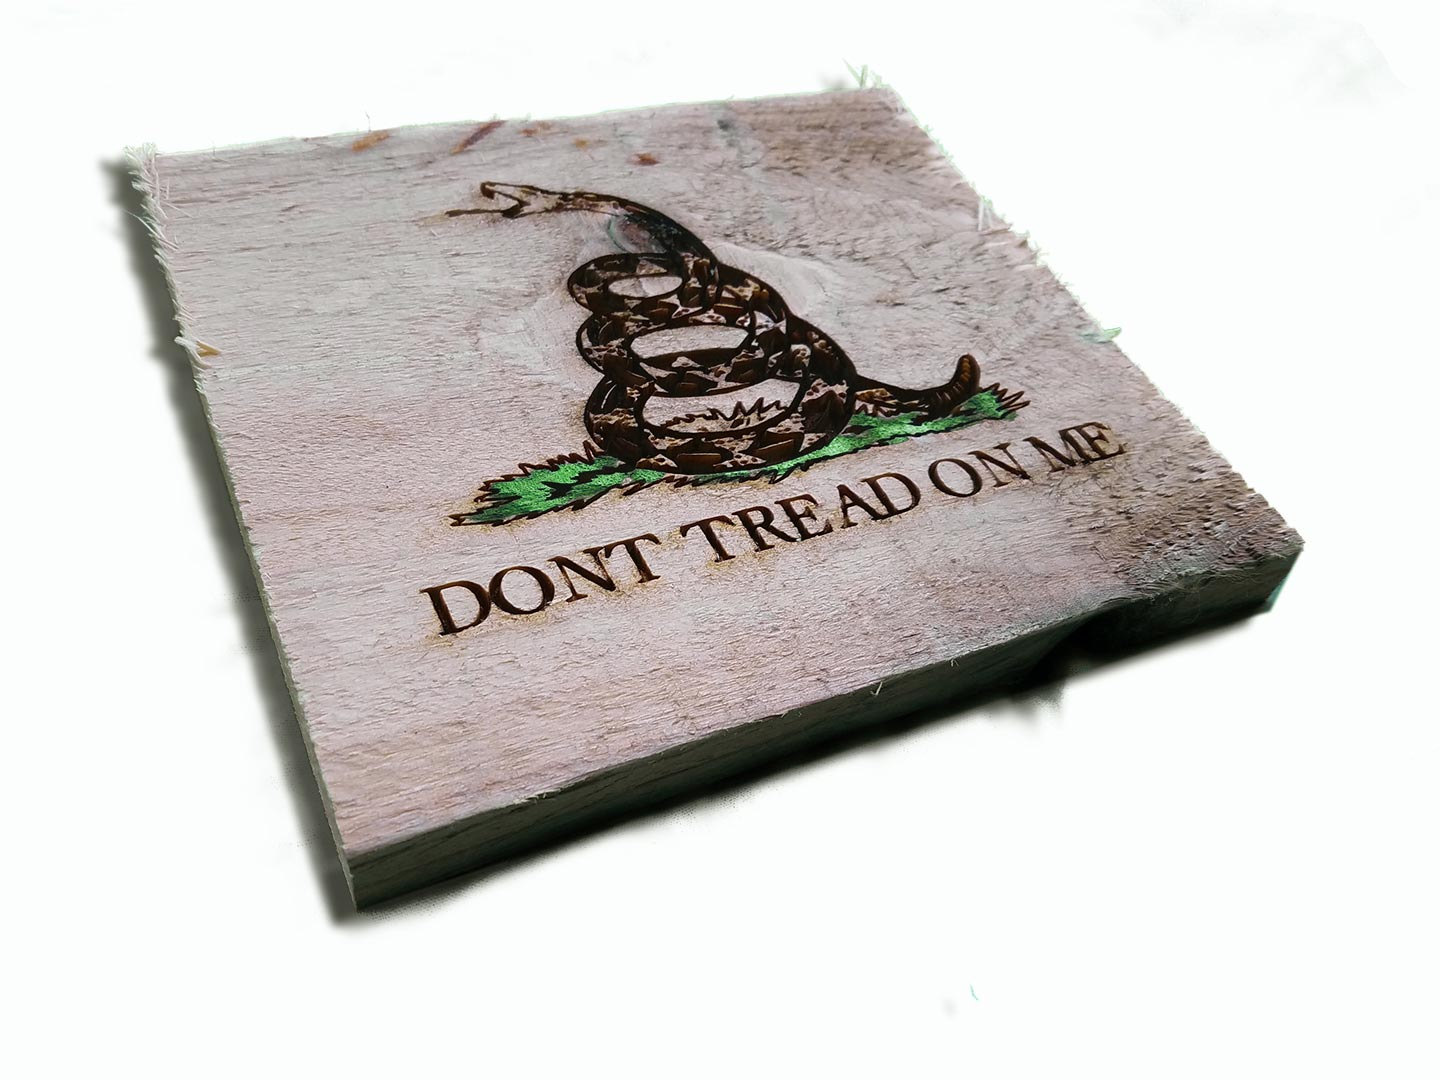 Gadsden Flag, Don't Tread On Me engraving. Weathered Wood One of a kind ,vintage, art, distressed, weathered, recycled, snake, yellow